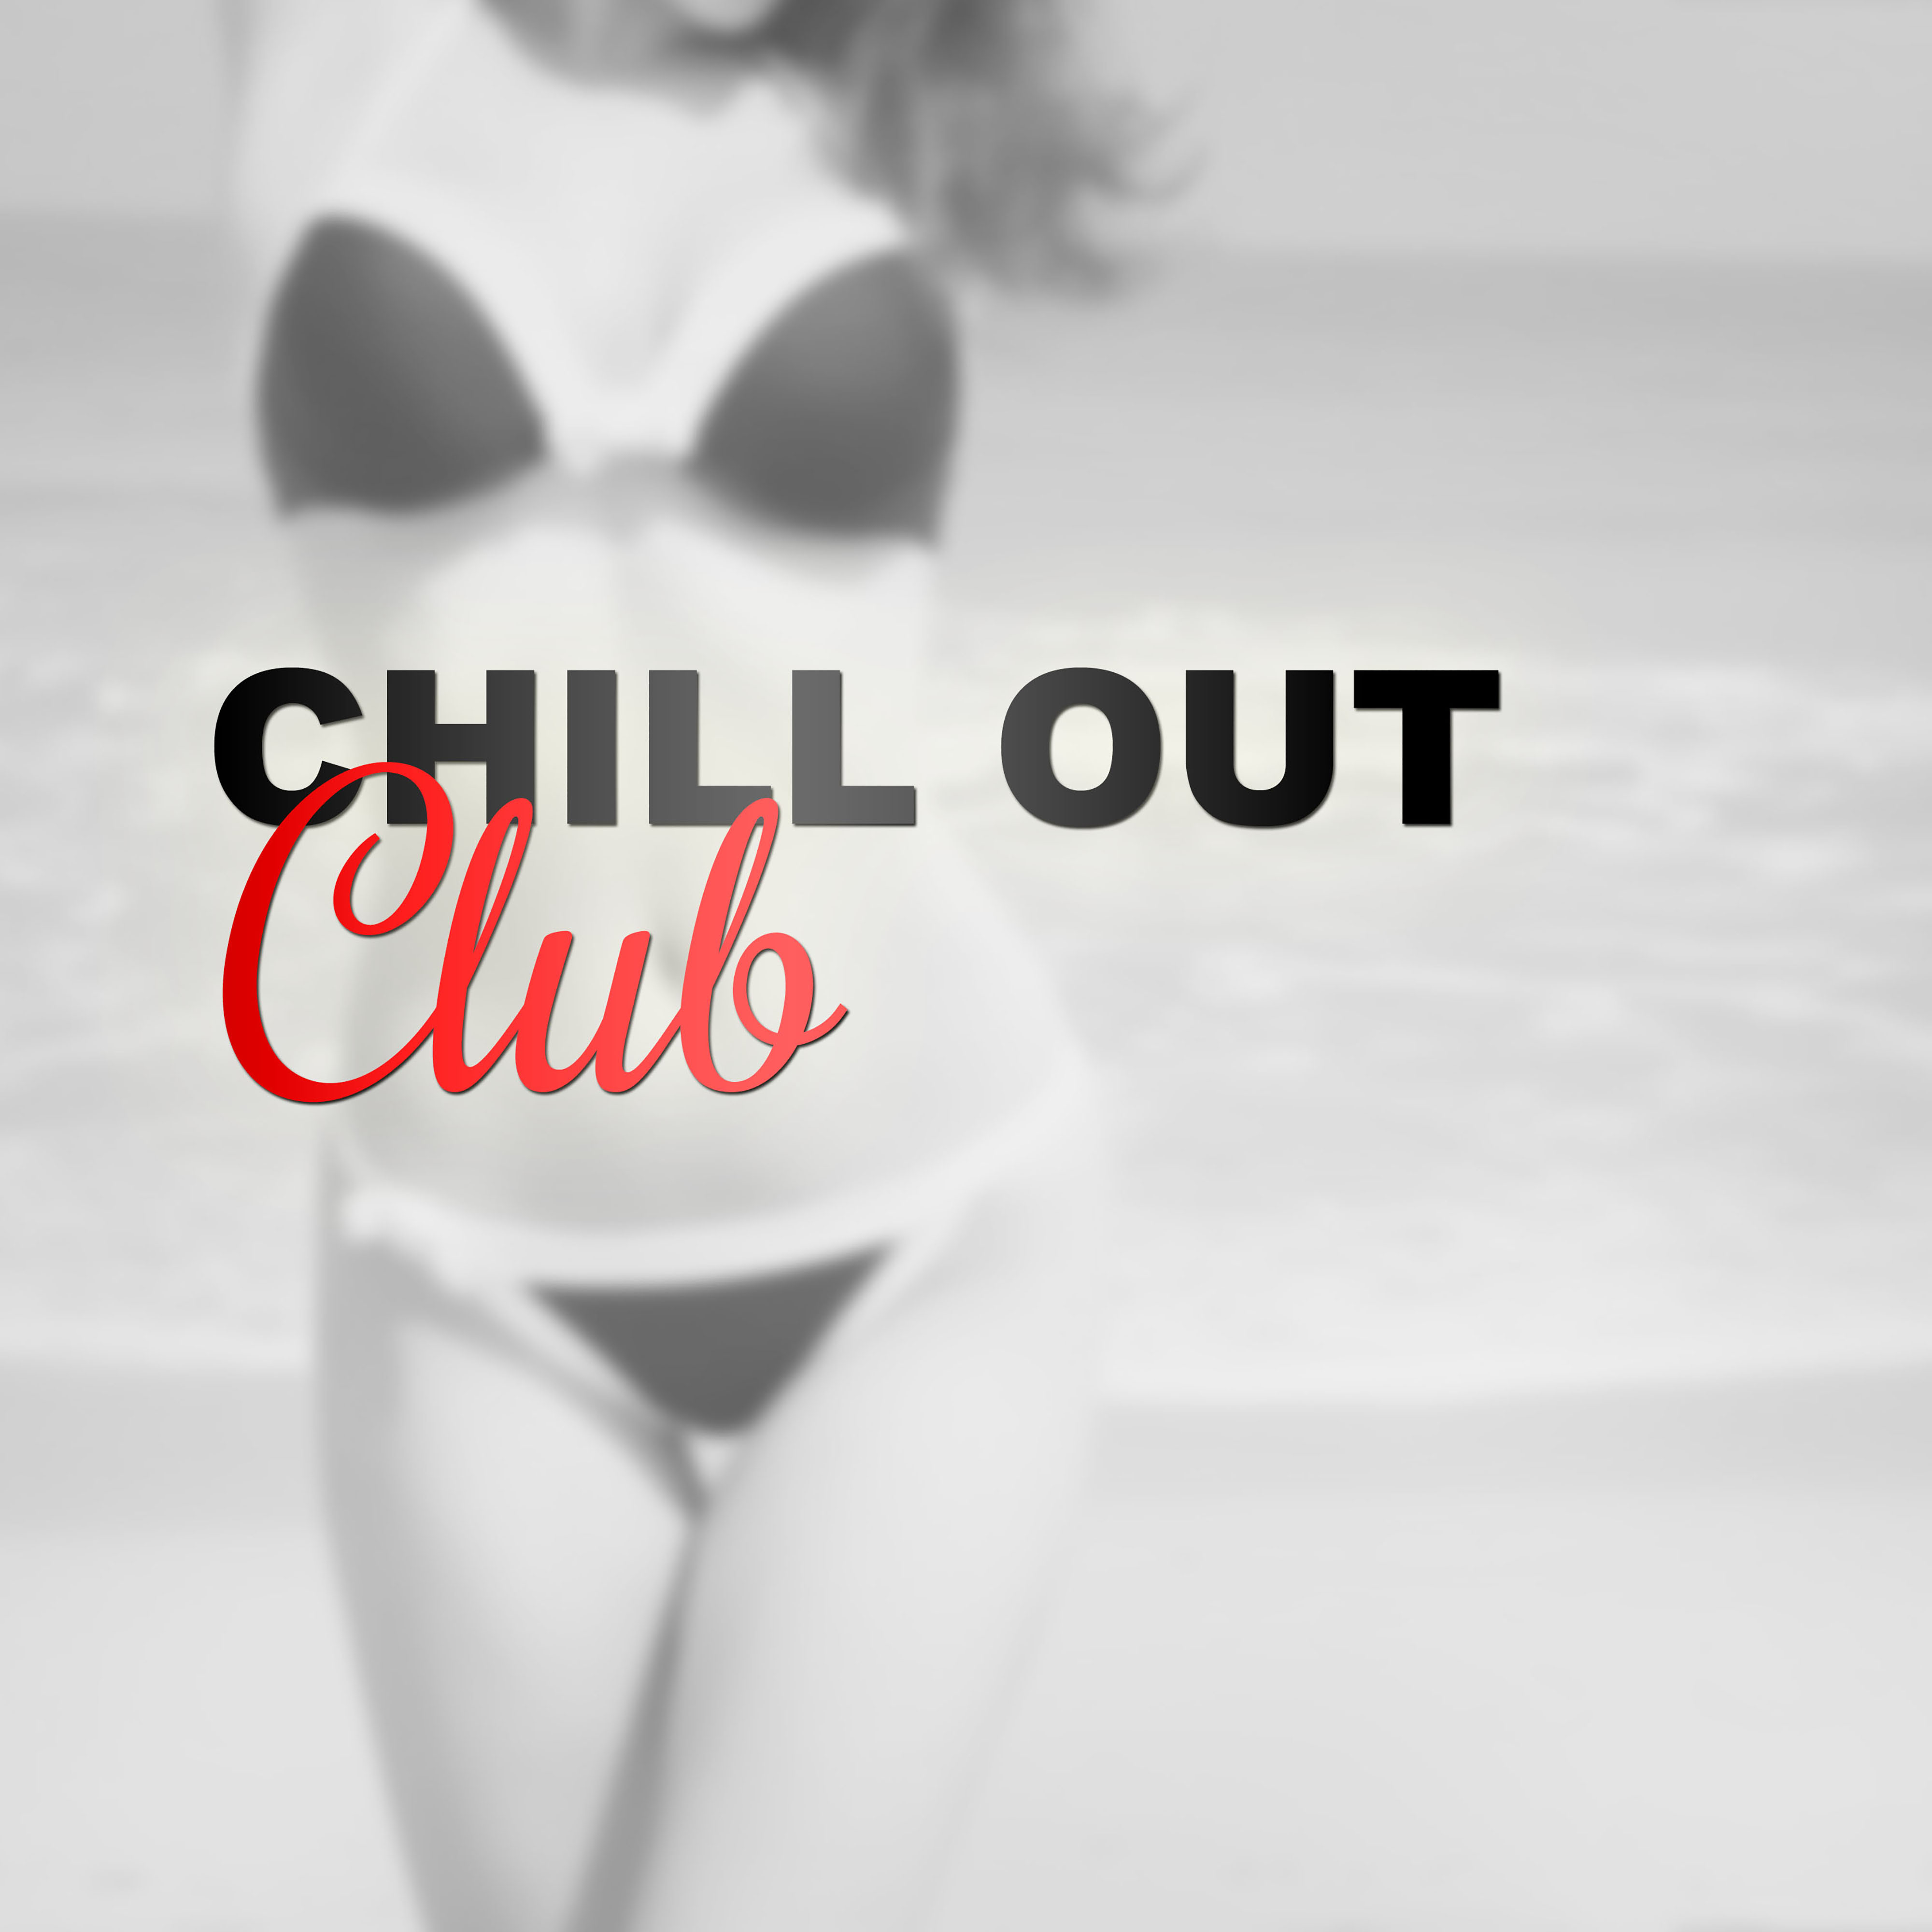 Chill Out Club  Deep Chill Out Music, Ambient Lounge, Chill Out Music for Club  Bar, Best Chill, Lounge Tunes, Chillout Hits